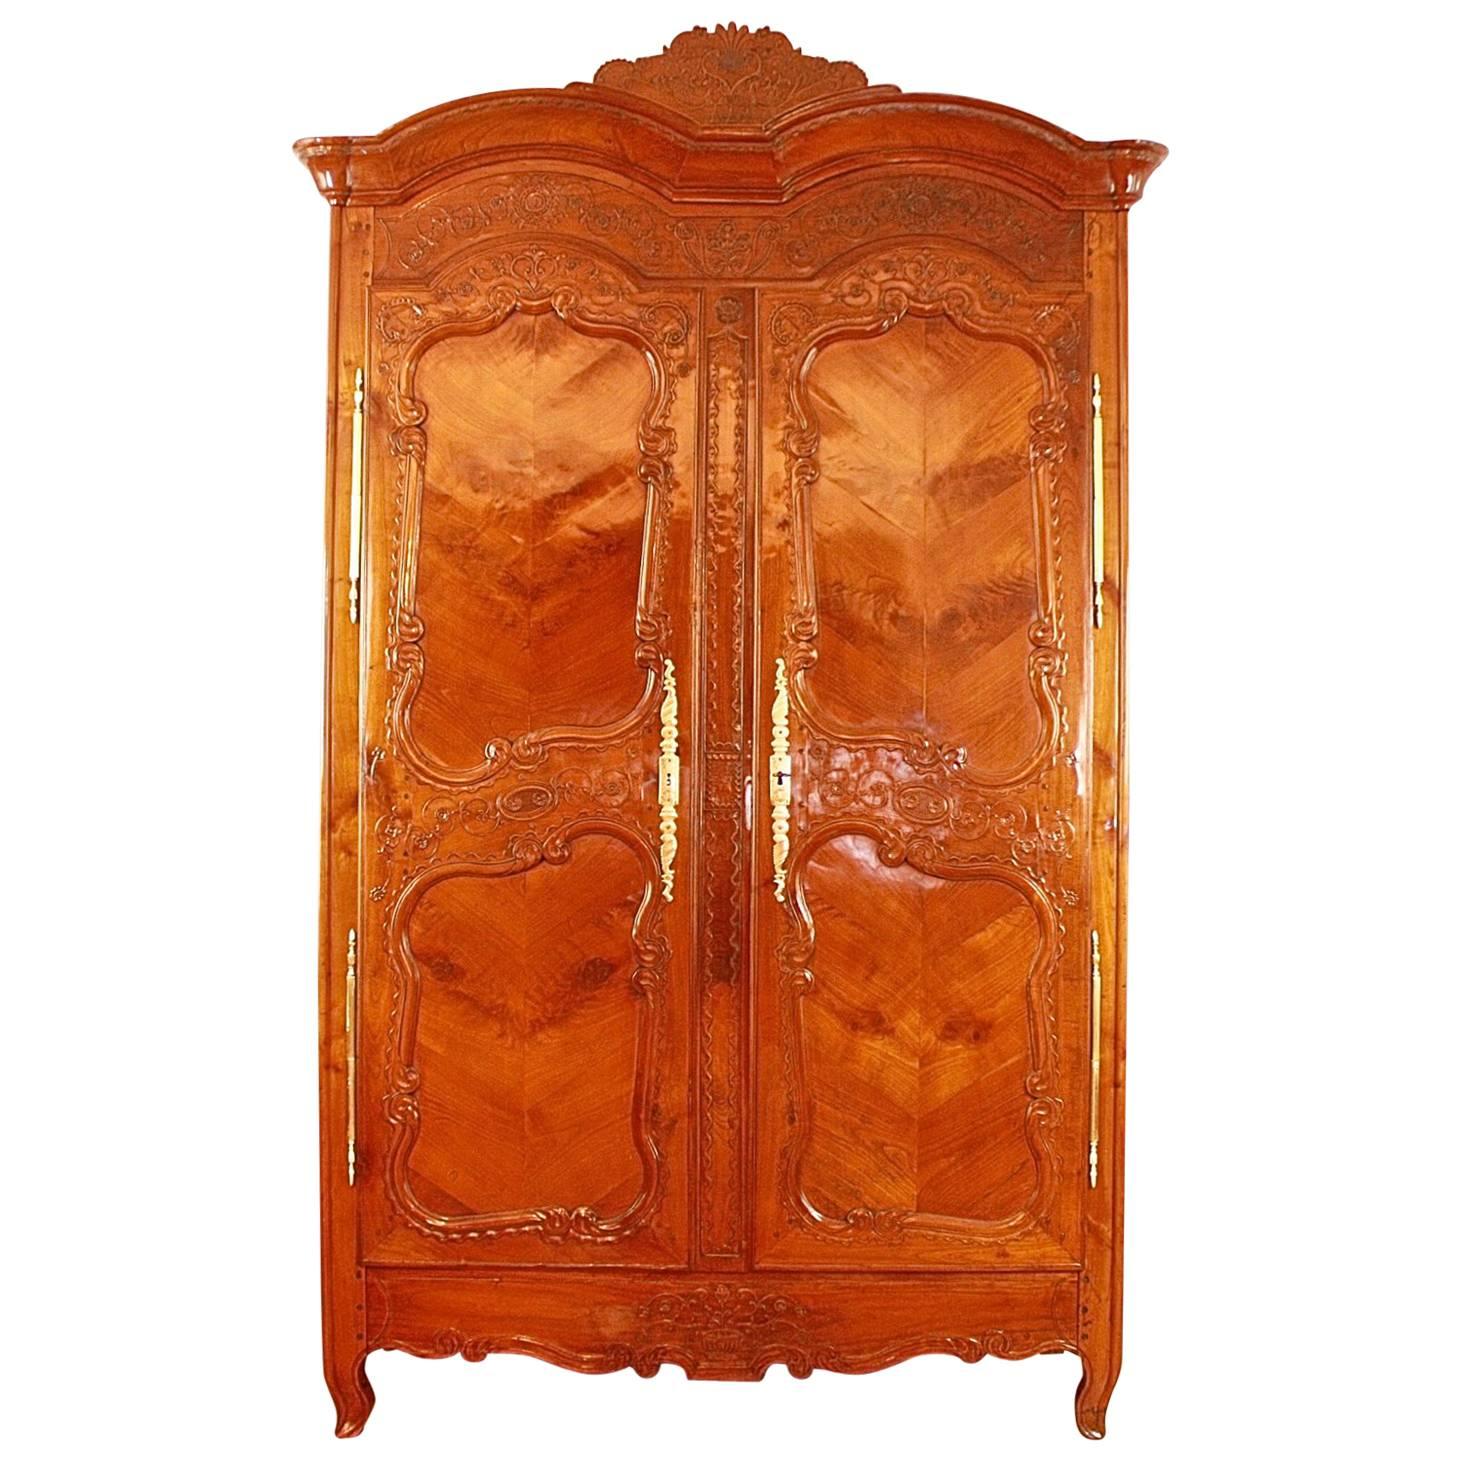 Bridal Cherry Wood Armoire, Brittany 'Rennes', 1758